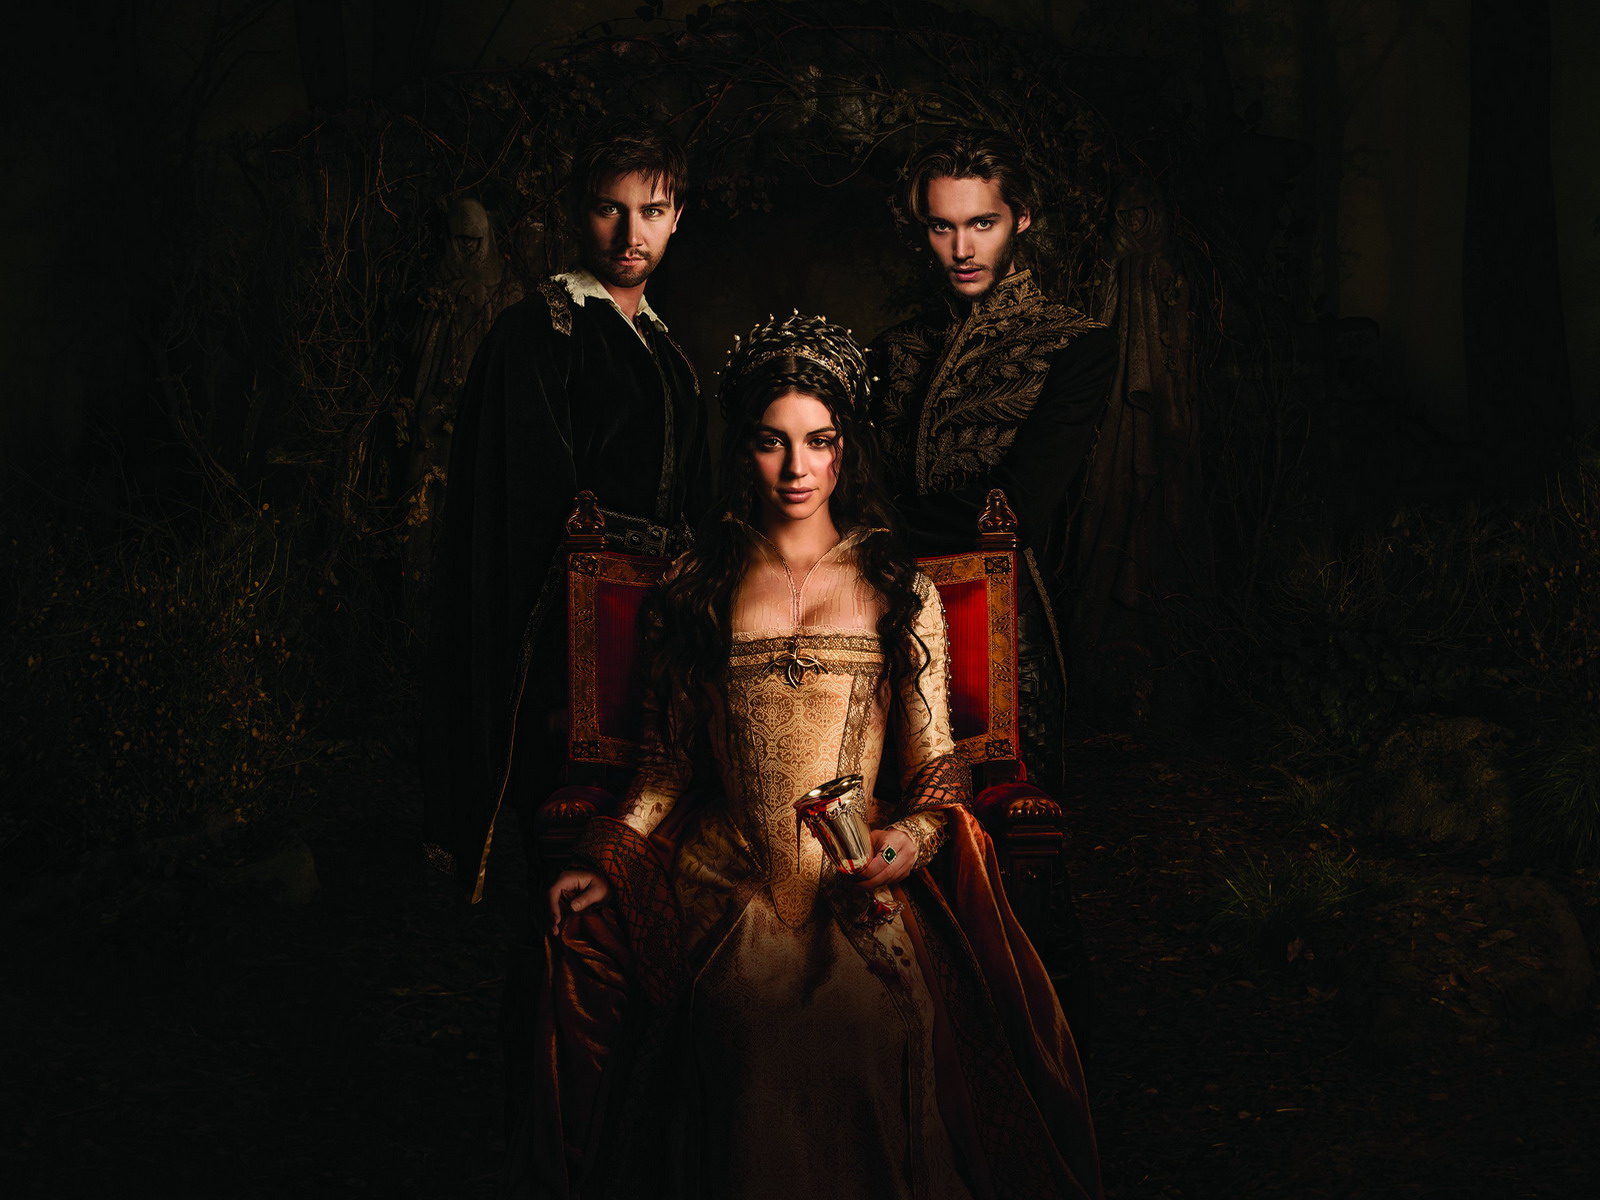 Download High quality Reign wallpaper / Movies / 1600x1200